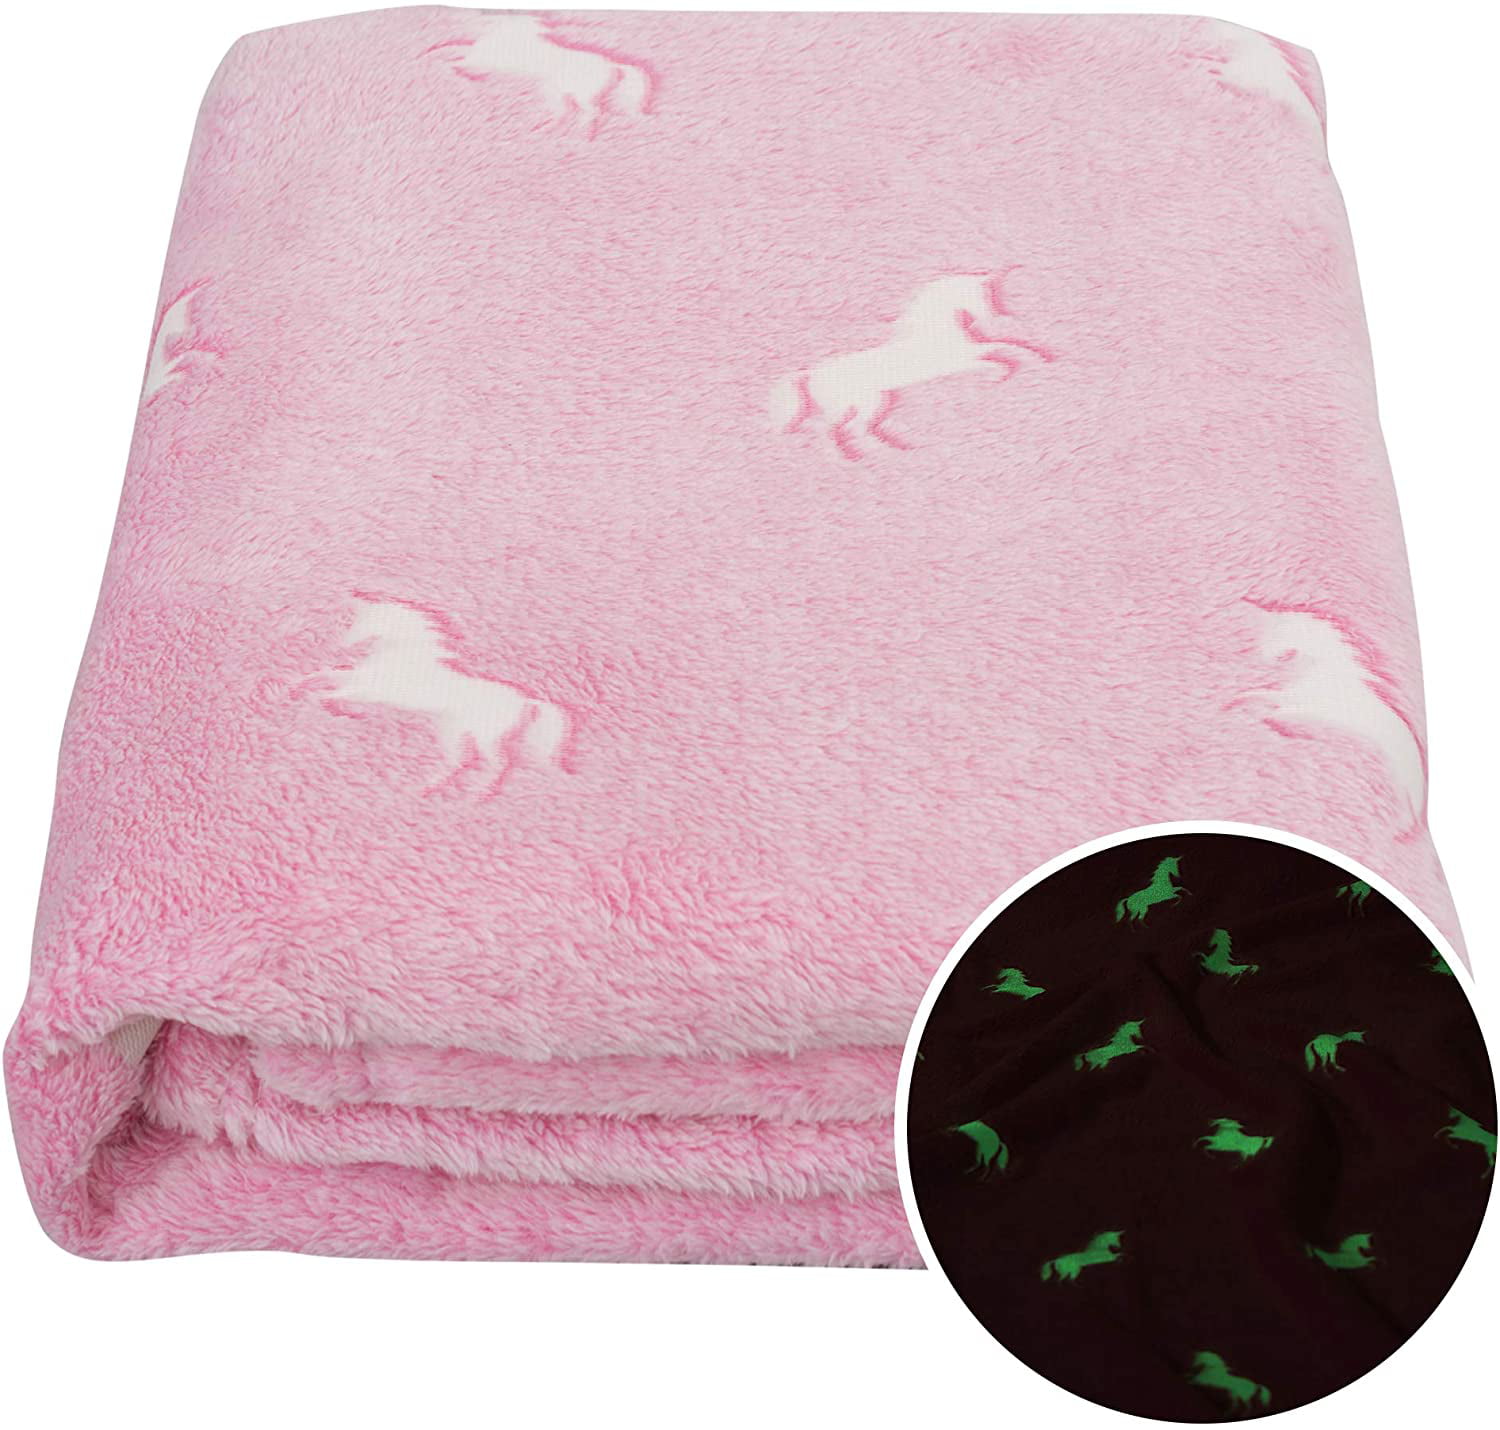 Details about   Snowflake Design Soft Blanket With Sherpa Backing Polyester Warm Knitted Throw 